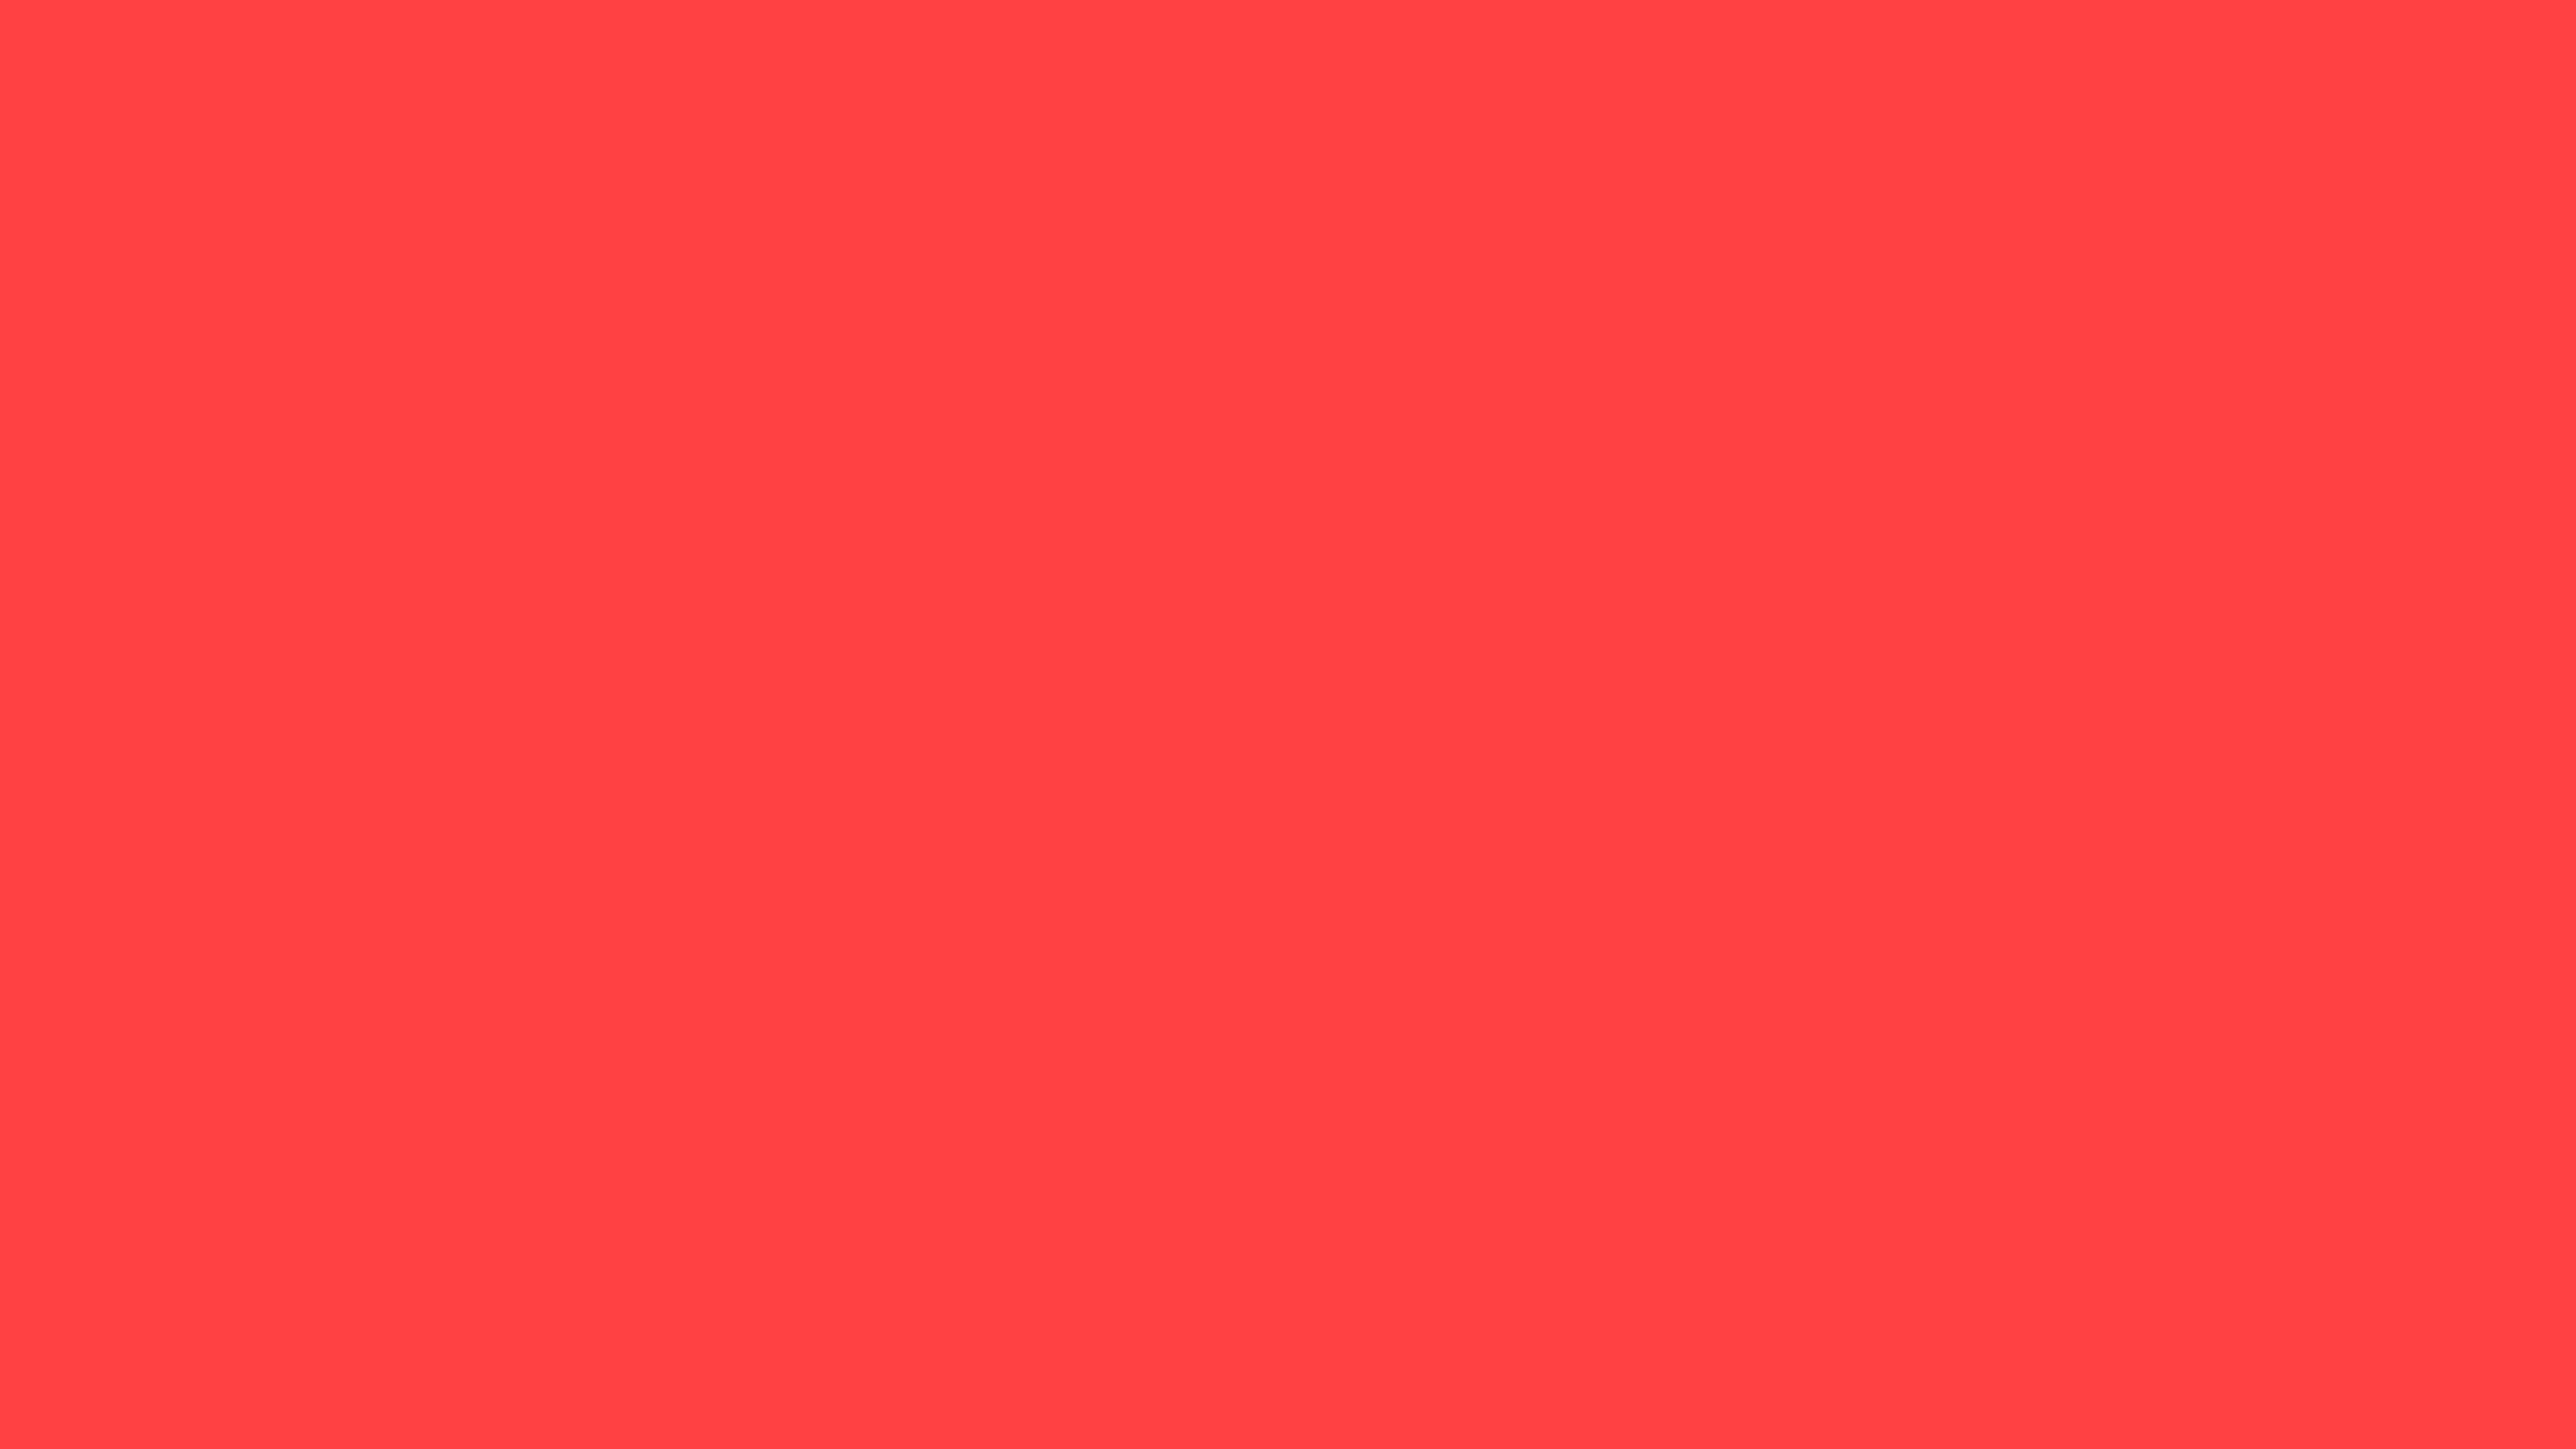 7680x4320 Coral Red Solid Color Background